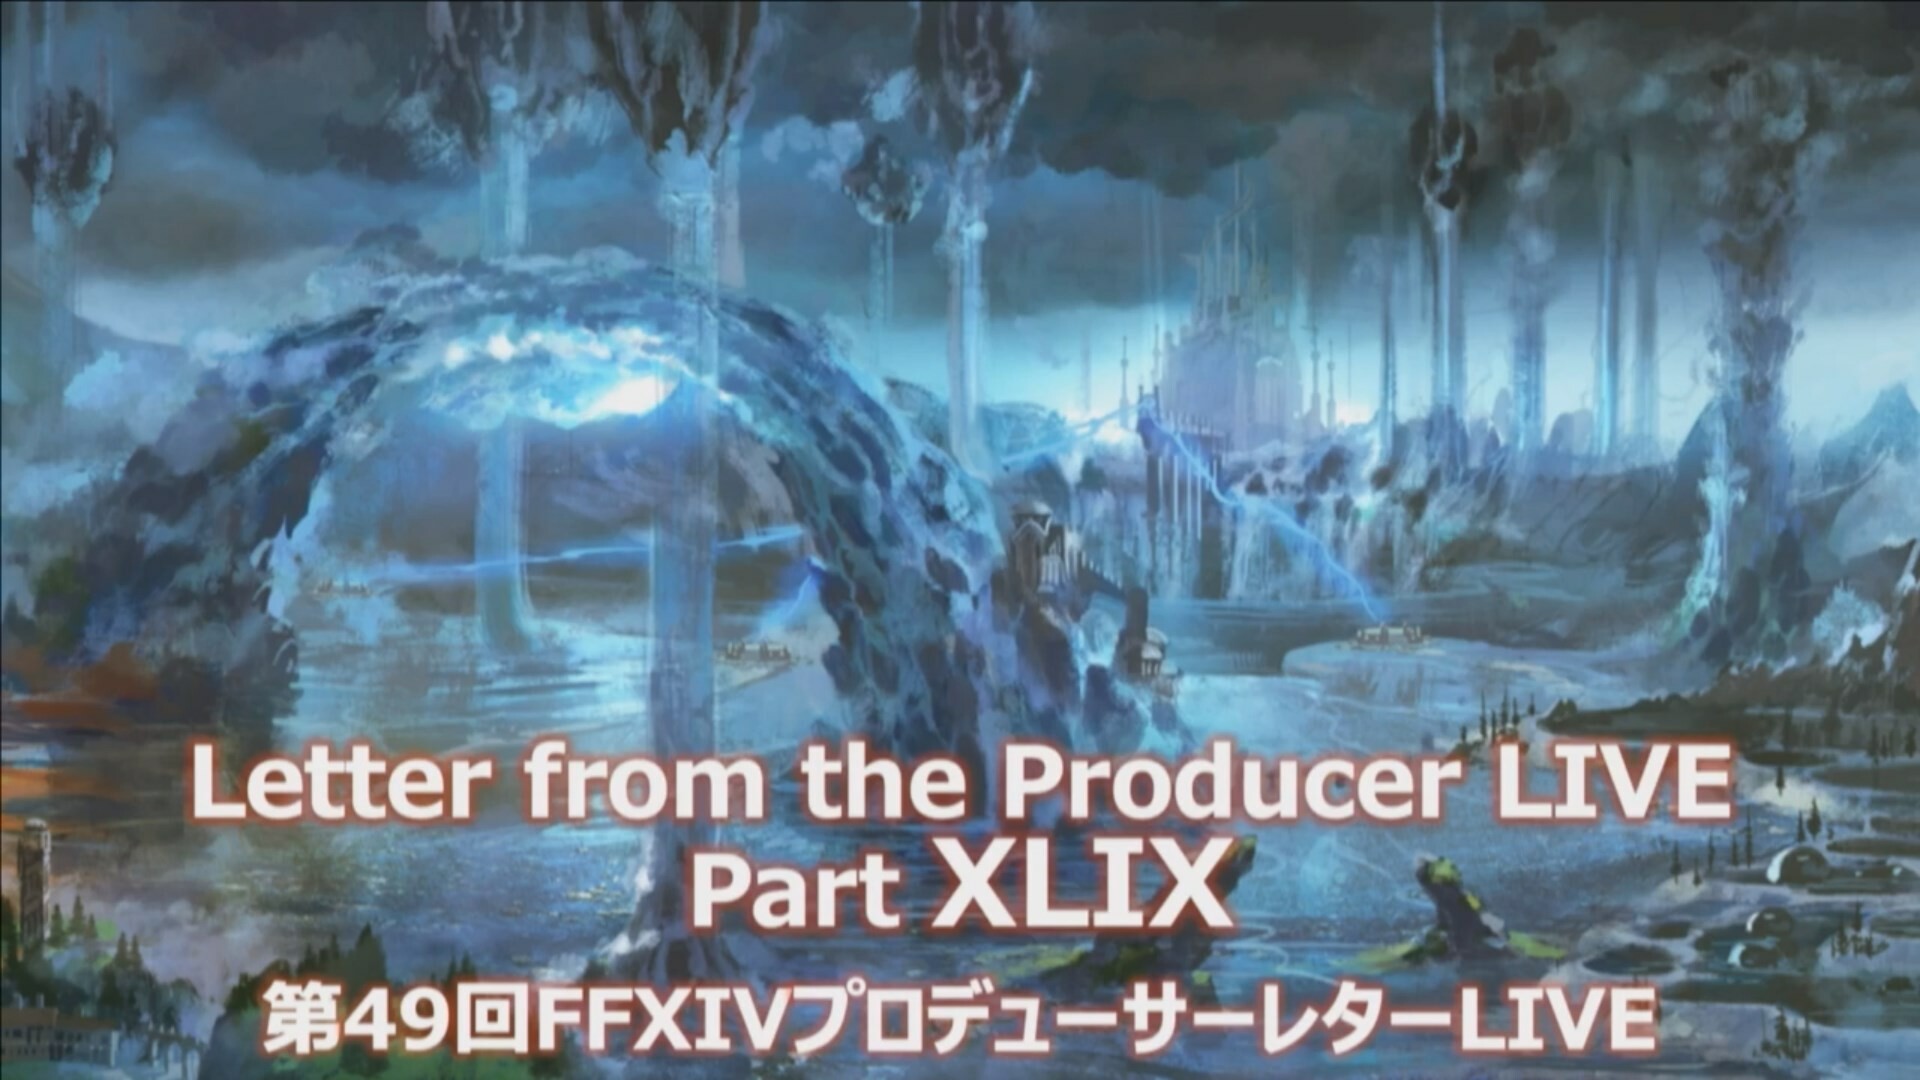 Letter from the Producer LIVE XLIX